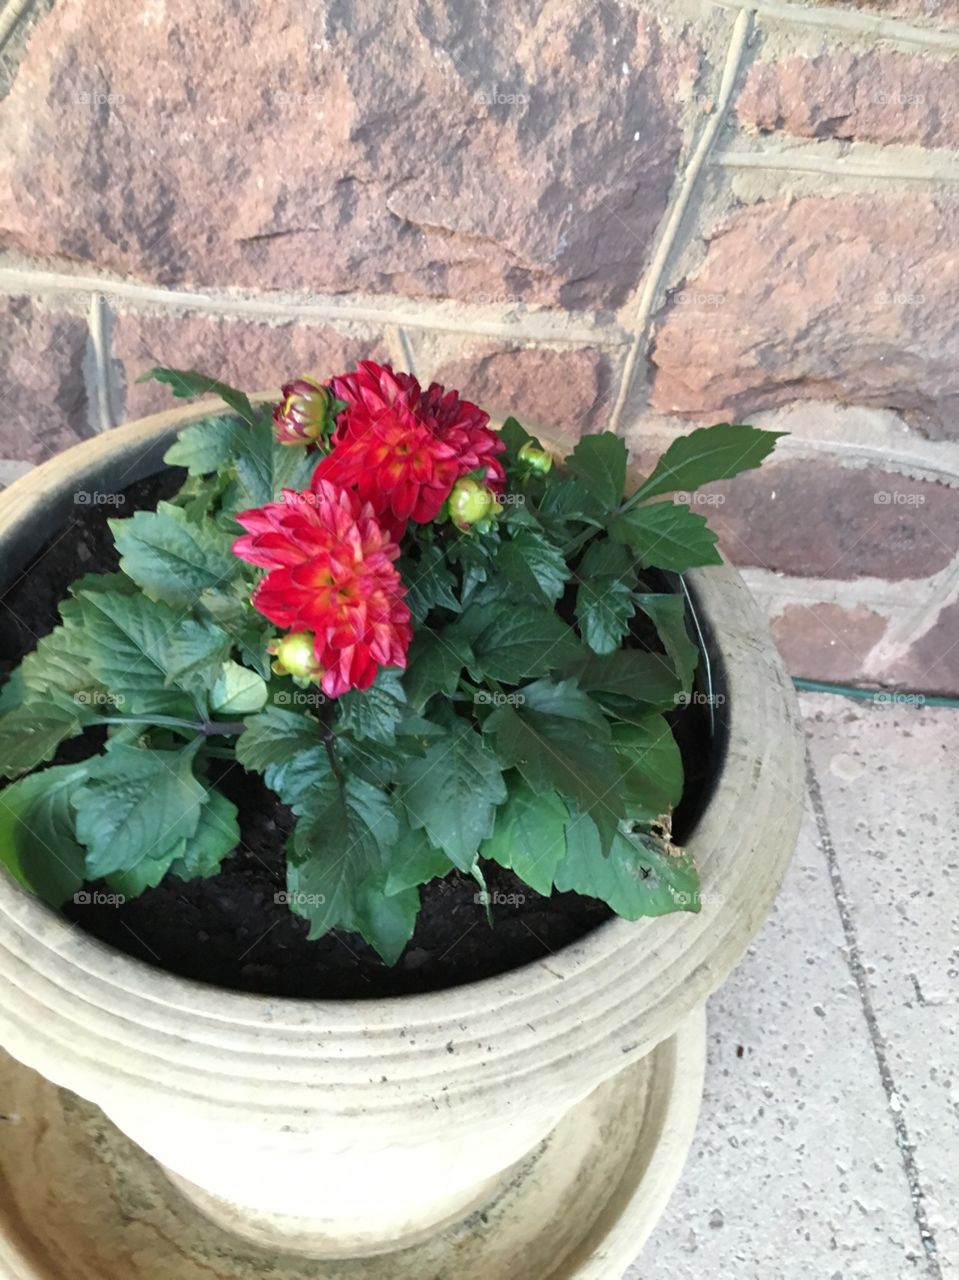 A duo of red dahlias grow in an old Tuscan pot on an old Tuscan house